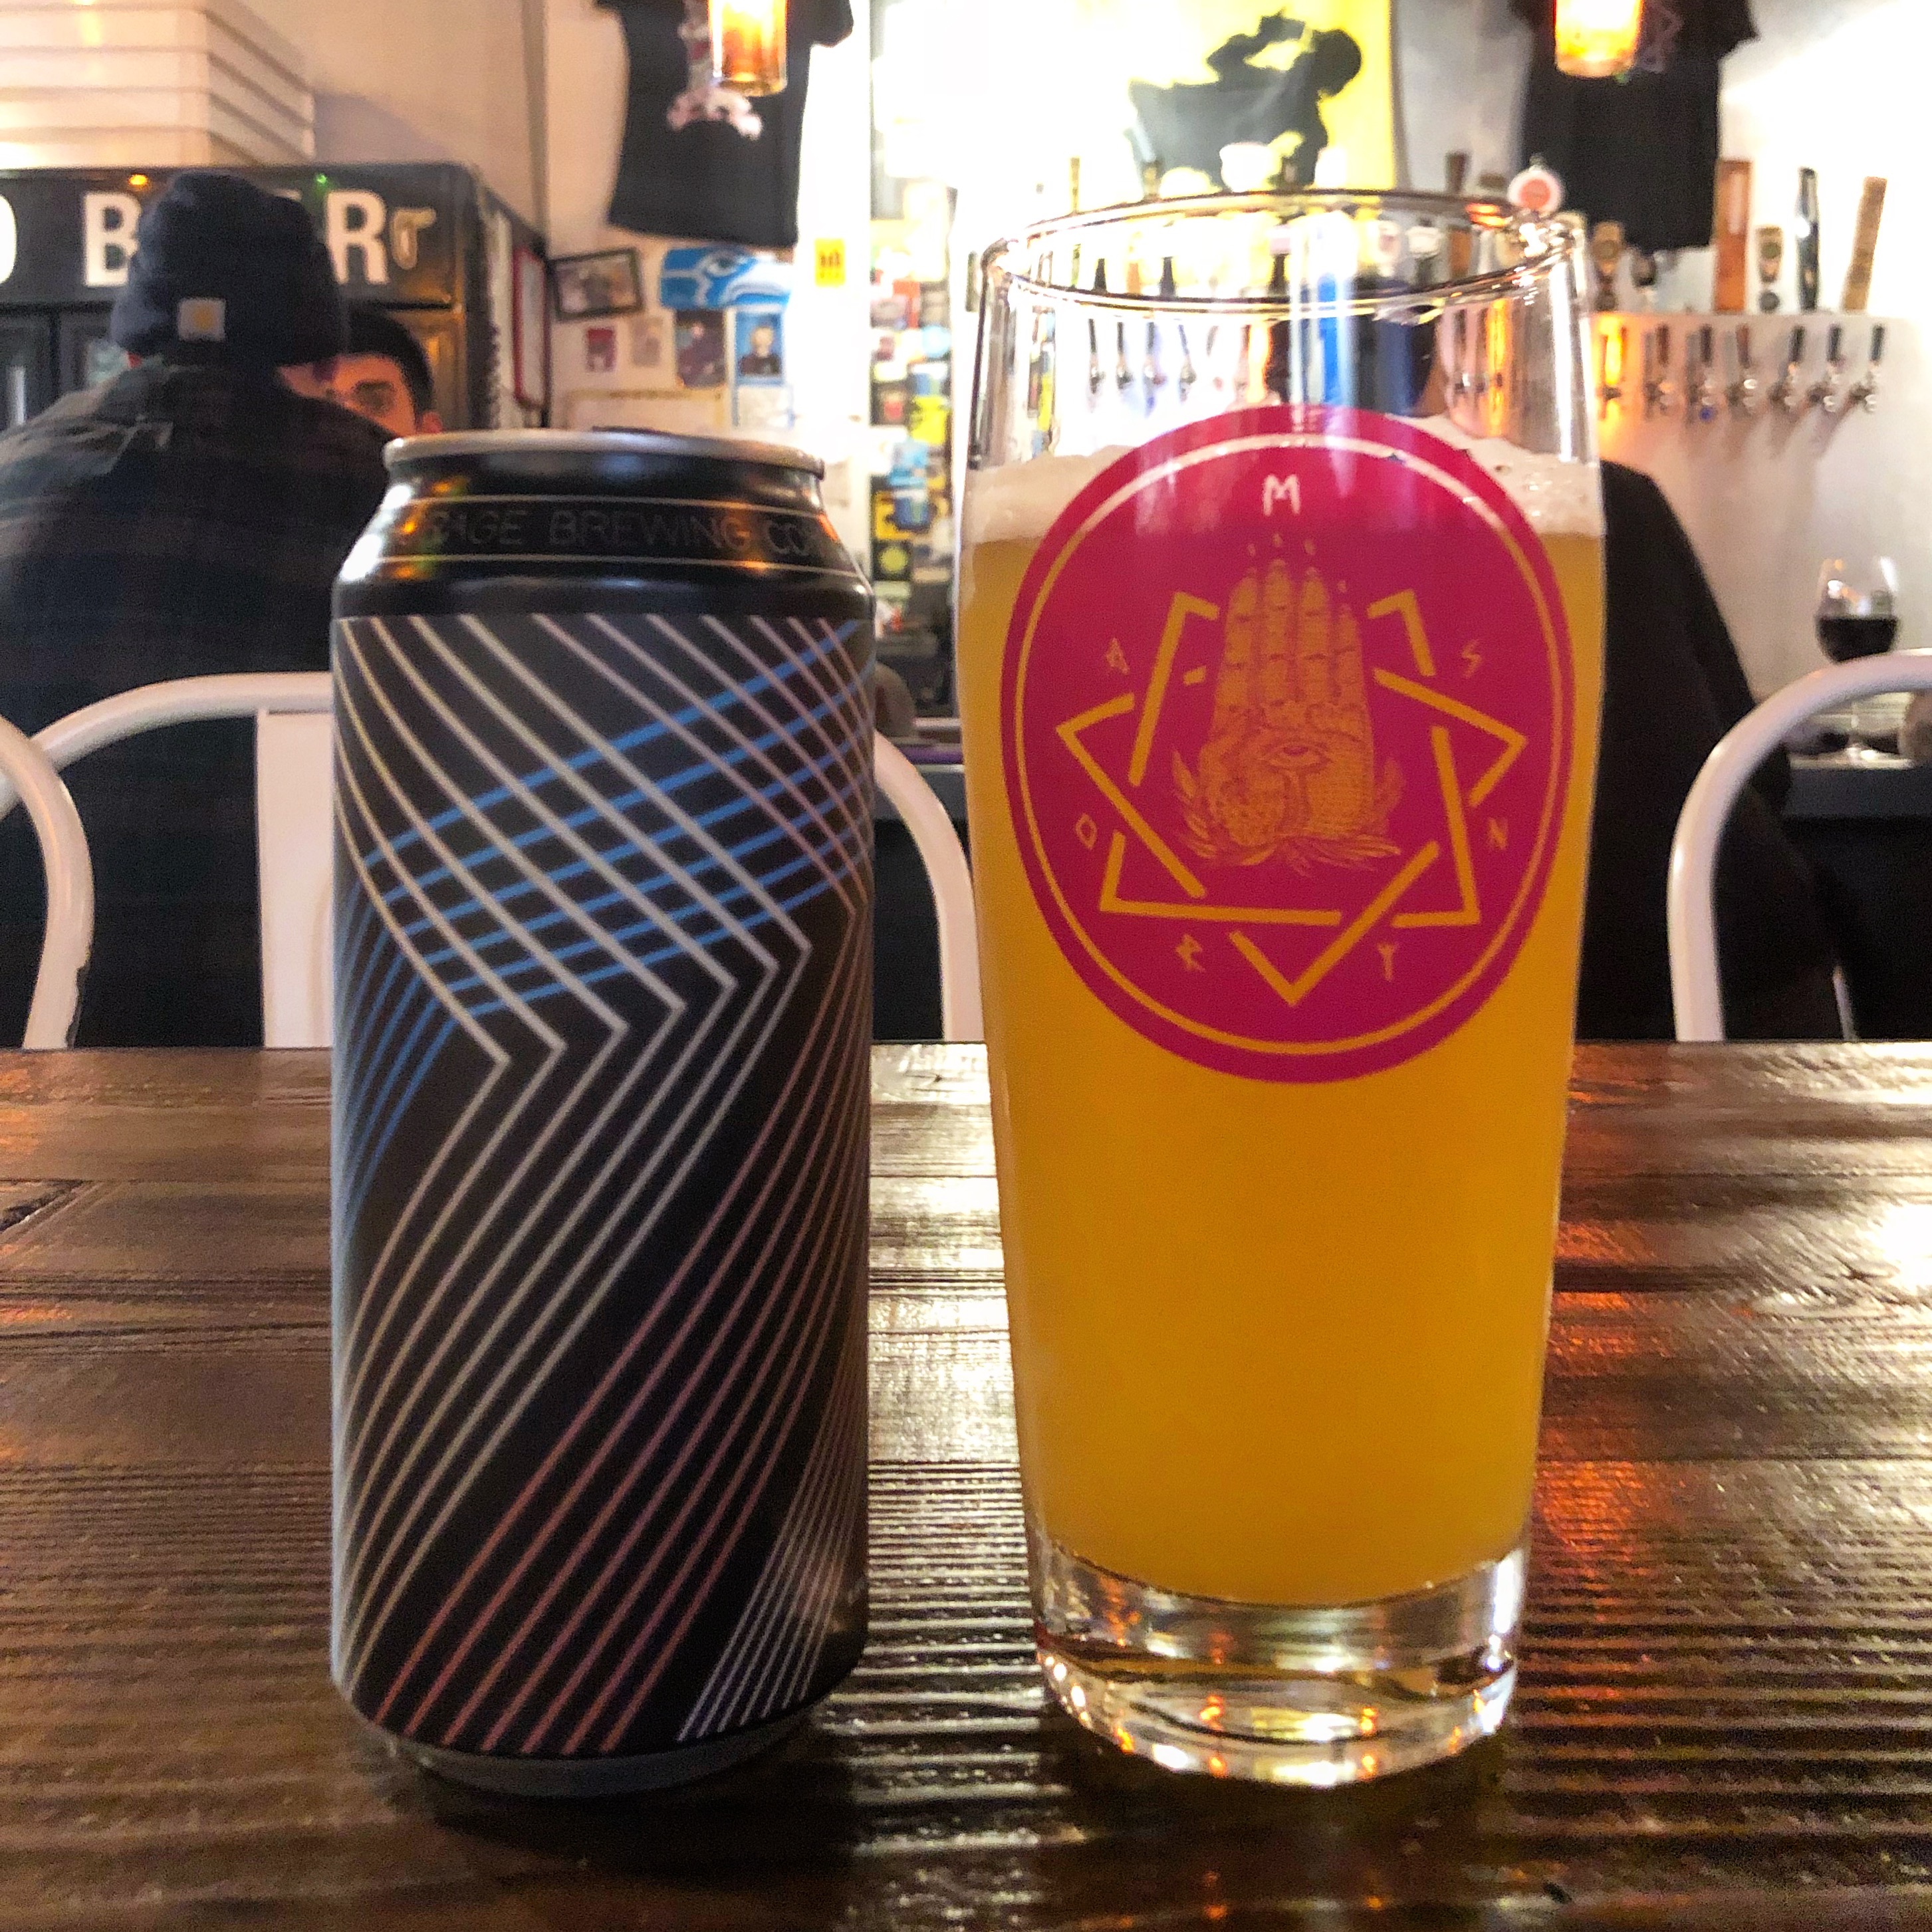 Anchorage Brewing has been brewing some exclusive beers for The Masonry in Seattle. The pizza there is so good and the beer list is equally amazing.